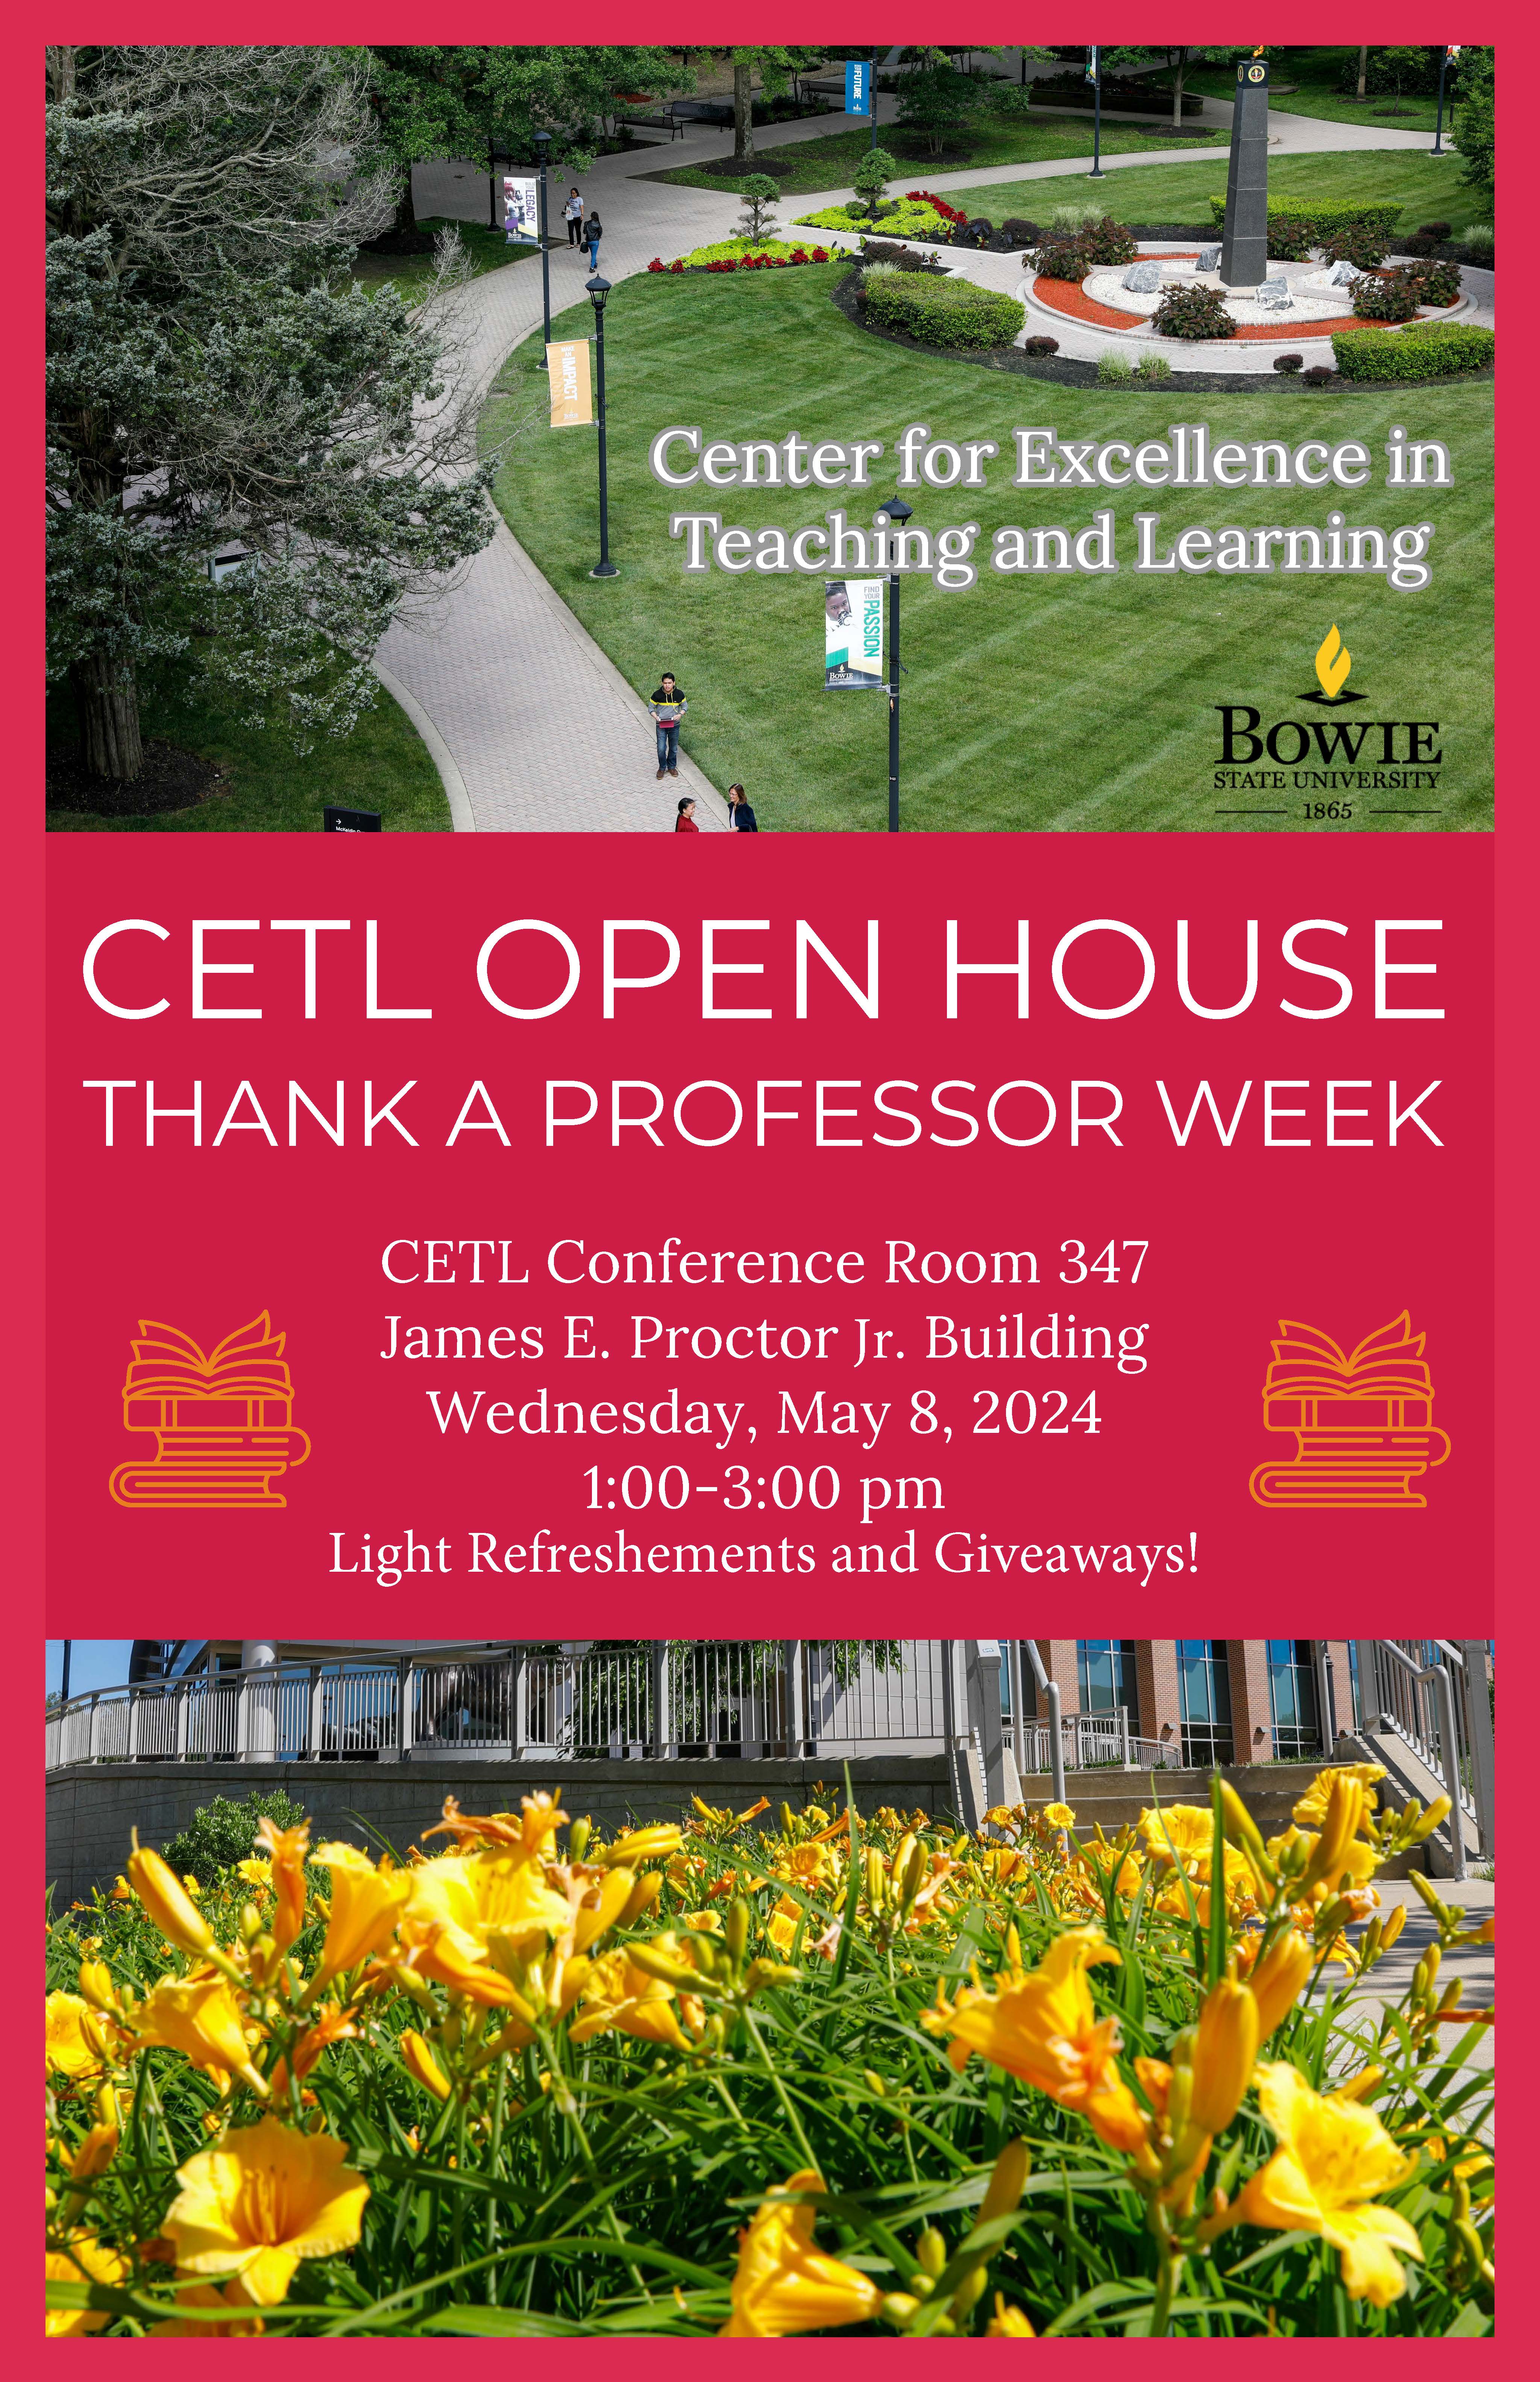 Flyer for the May 5, 2024 CETL Thank a Professor Week Open House featuring an exterior image of JEP and the BSU Torch as well as an image of yellow lilllies